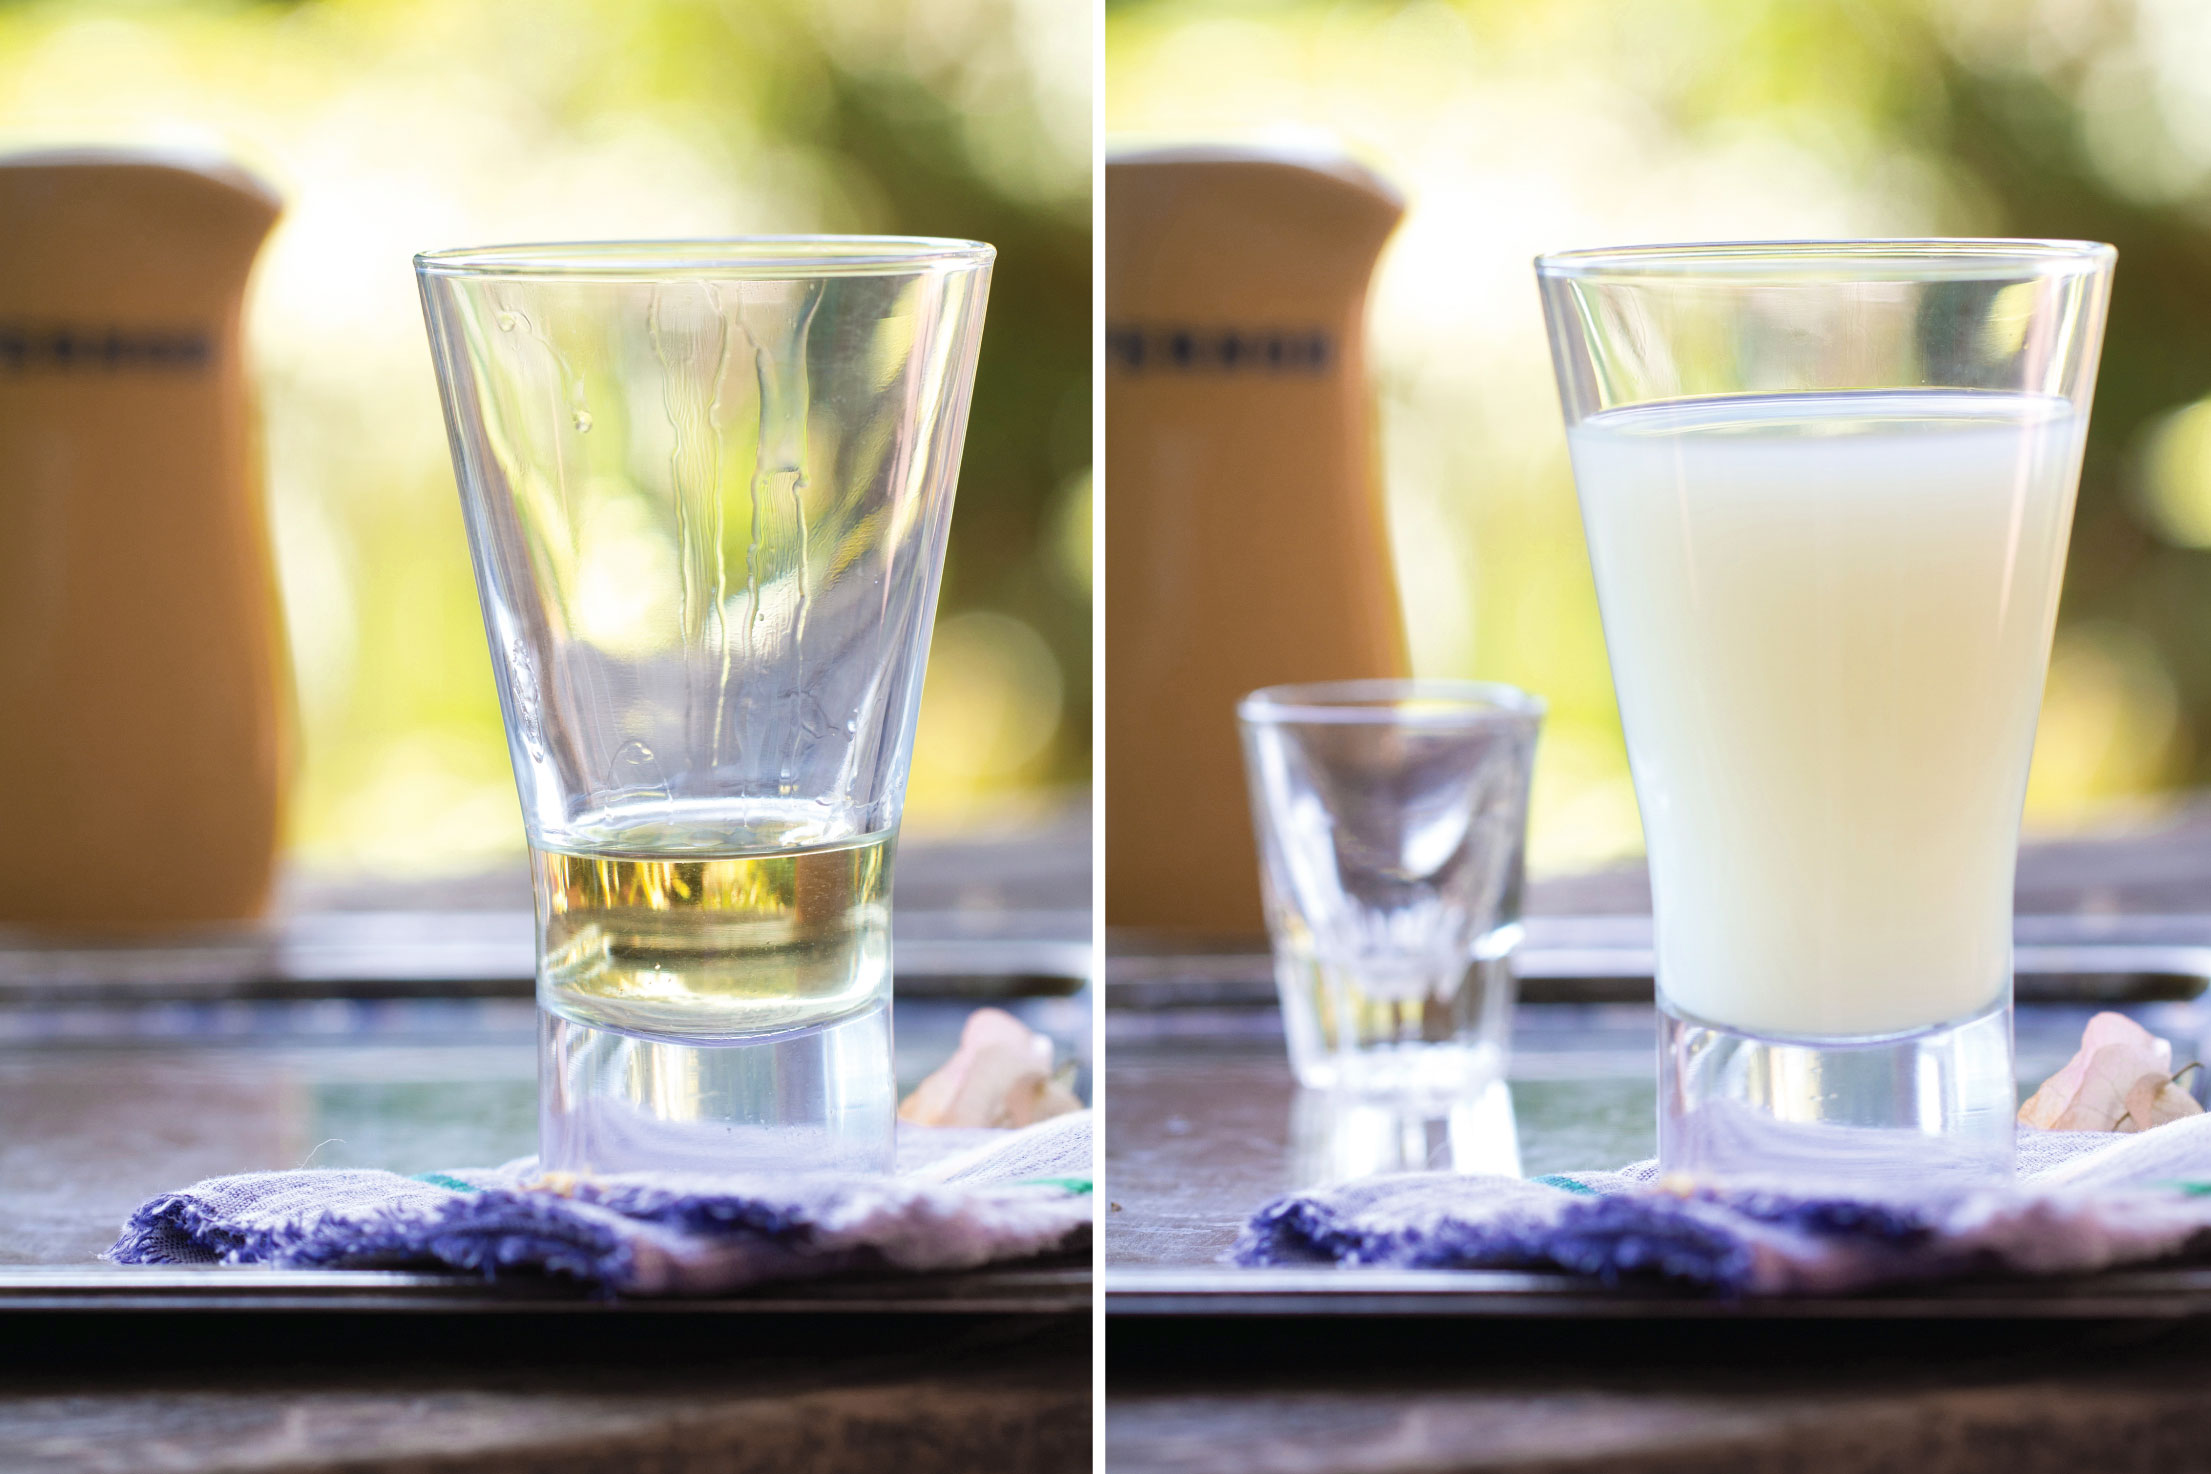 How to Drink Pastis Like the French